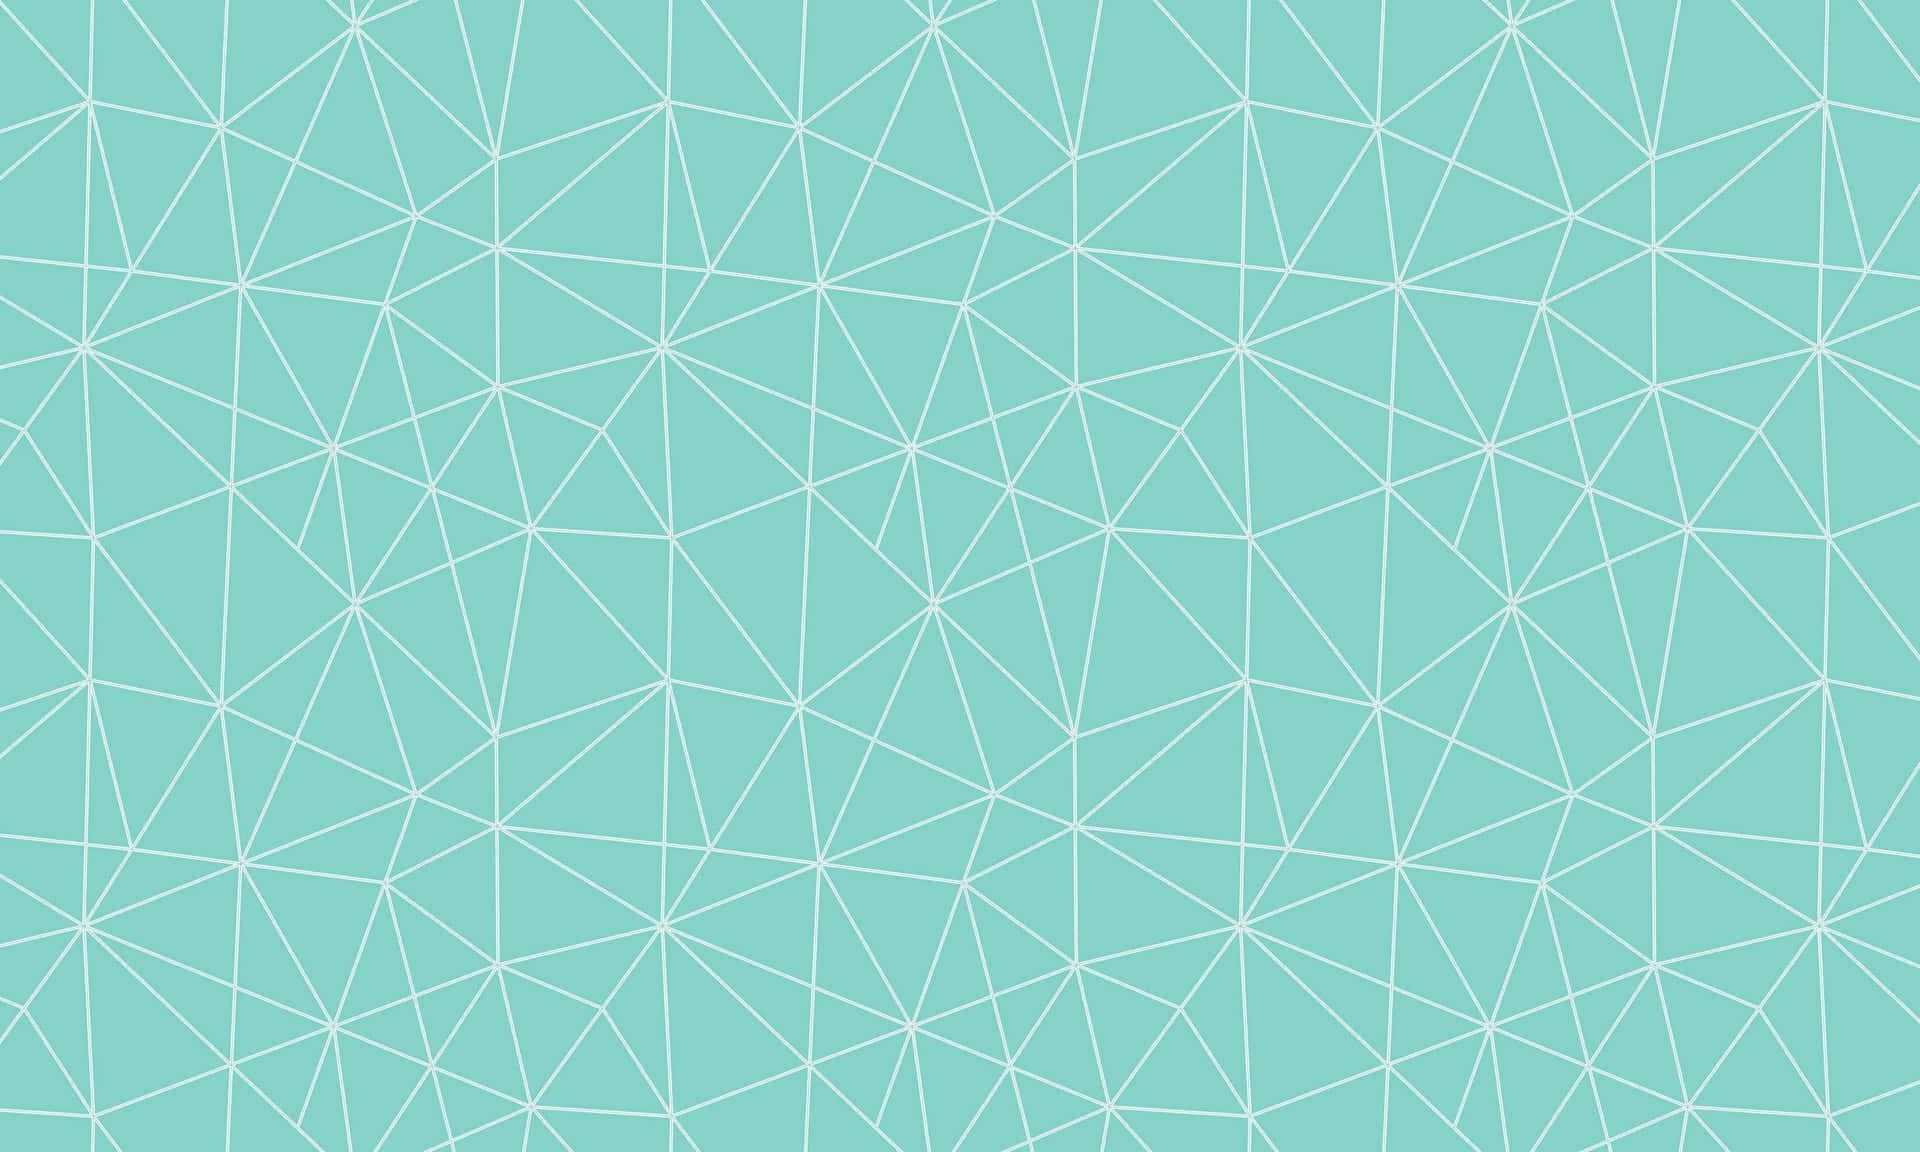 A geometric pattern of lines and shapes on a pale green background - Mint green